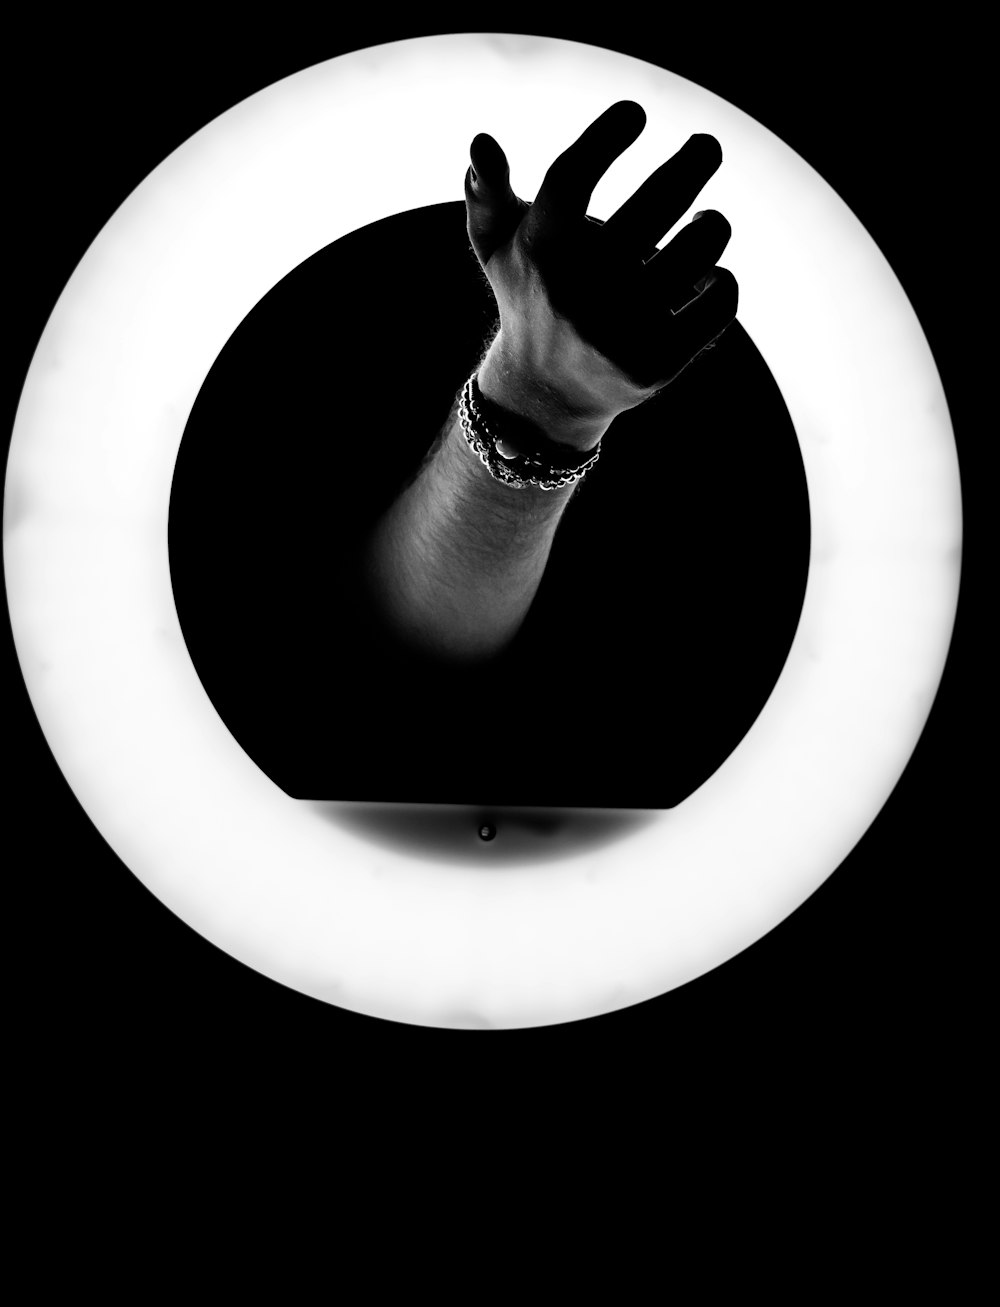 999+ Ring Light Pictures | Download Free Images on Unsplash